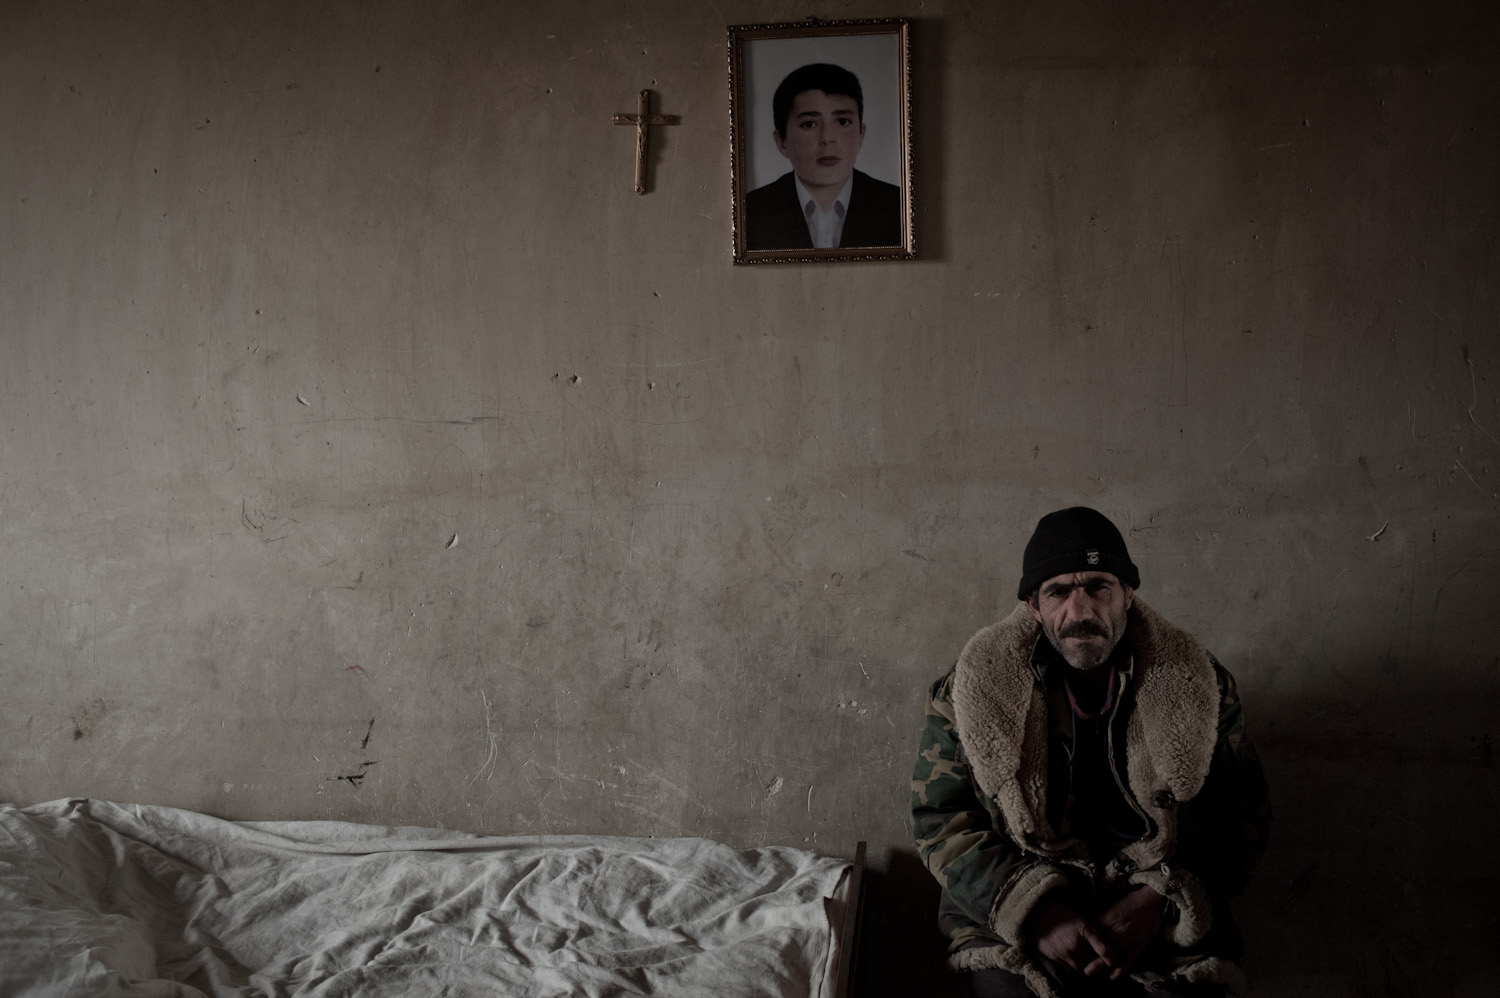  Meguerdich Meguerdichian sits next to the bed where his son Jora died in 2012. While serving at the Yeghnikner military base, Jora was severely beaten and fell into a coma. He later died at home in Lousakn village.   